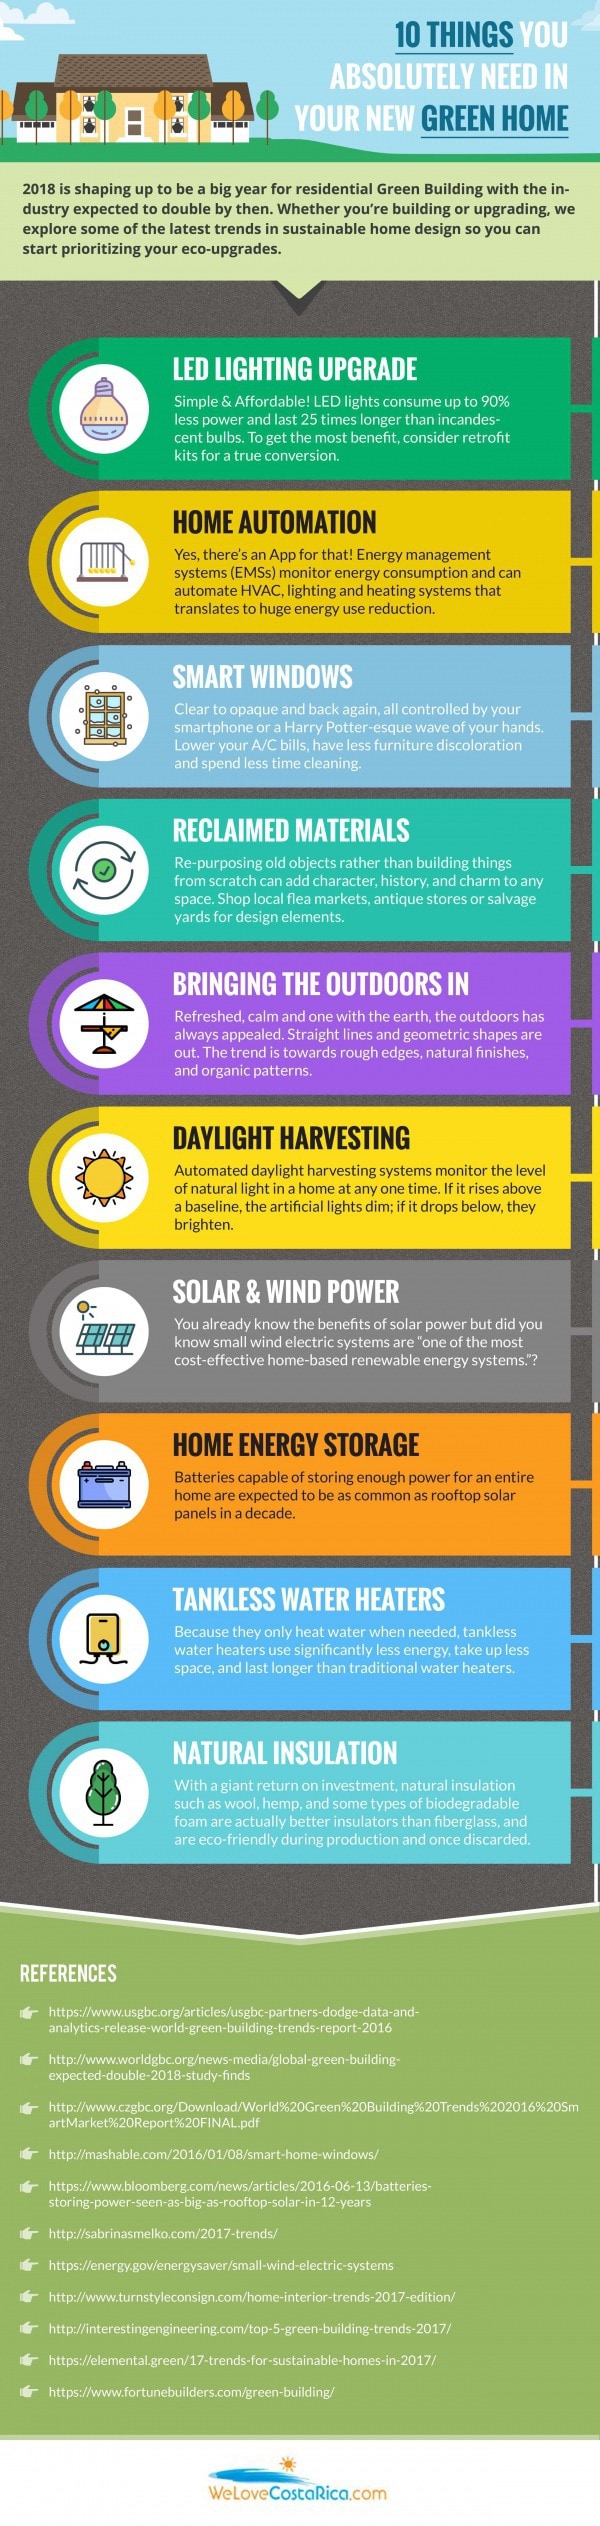 10 Things You Need in your New Green Home Infographic